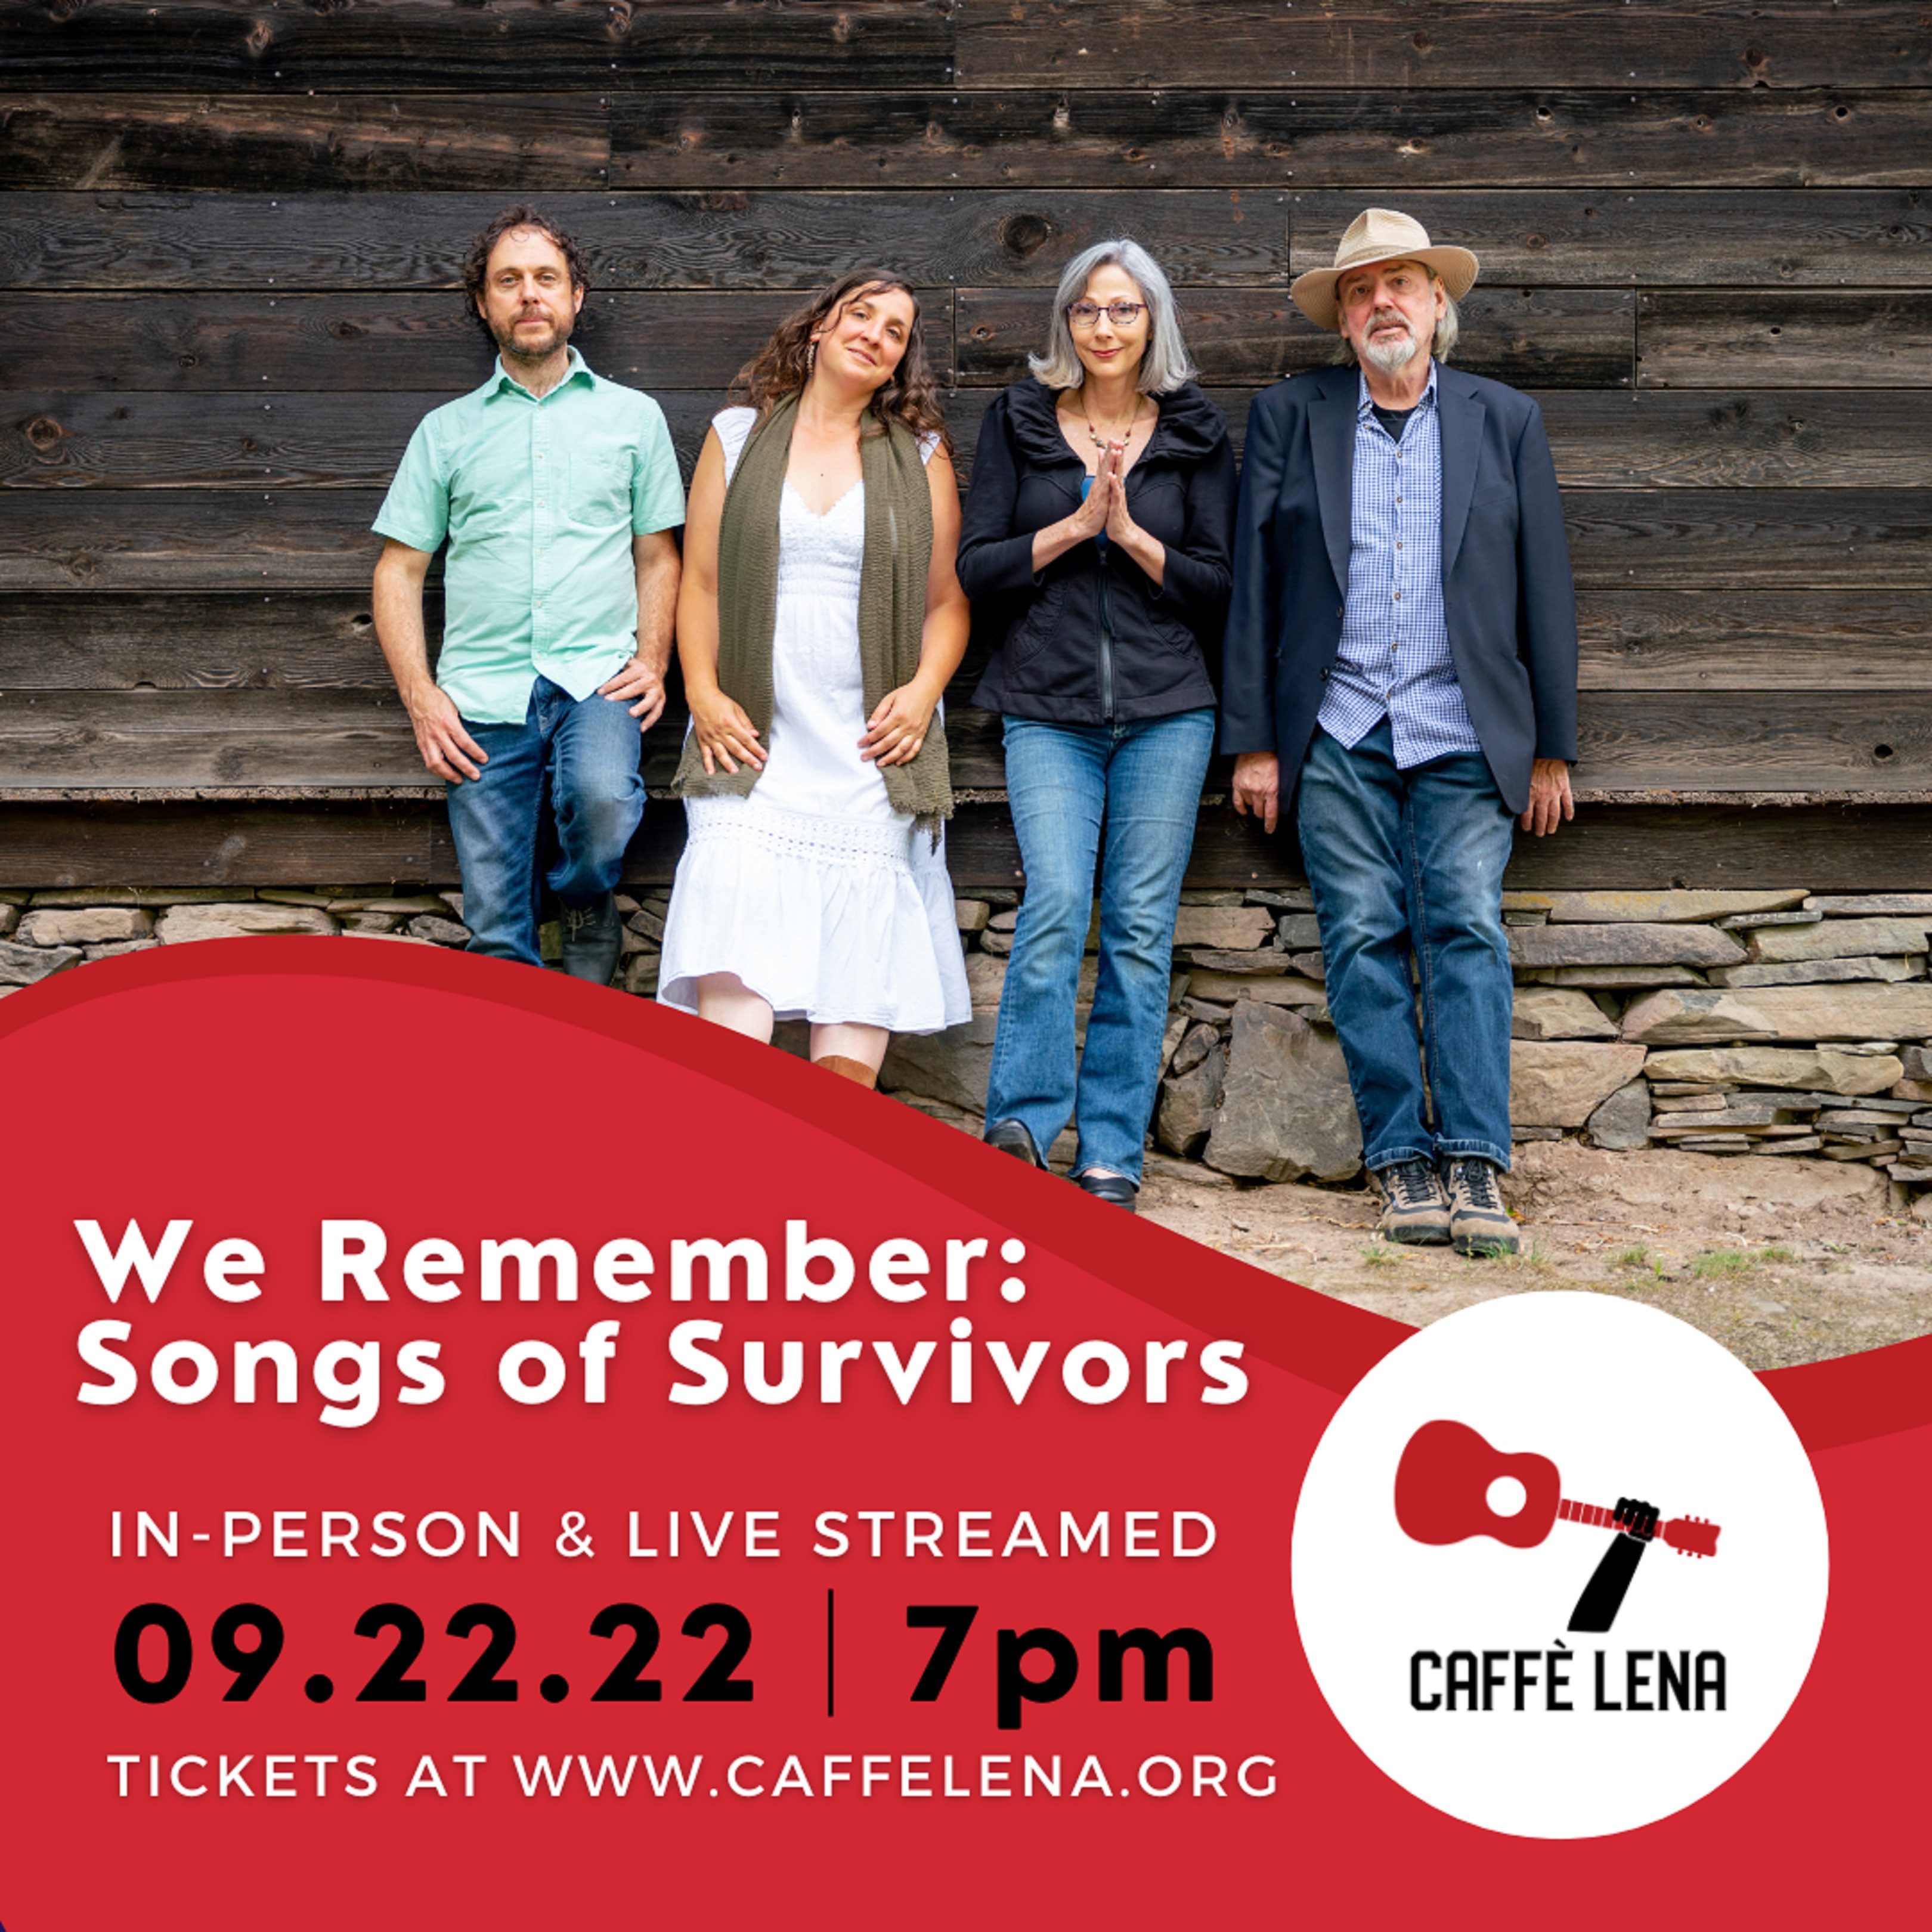 Sept 22-29 PBS Singer-Songwriters Stream from Caffe Lena